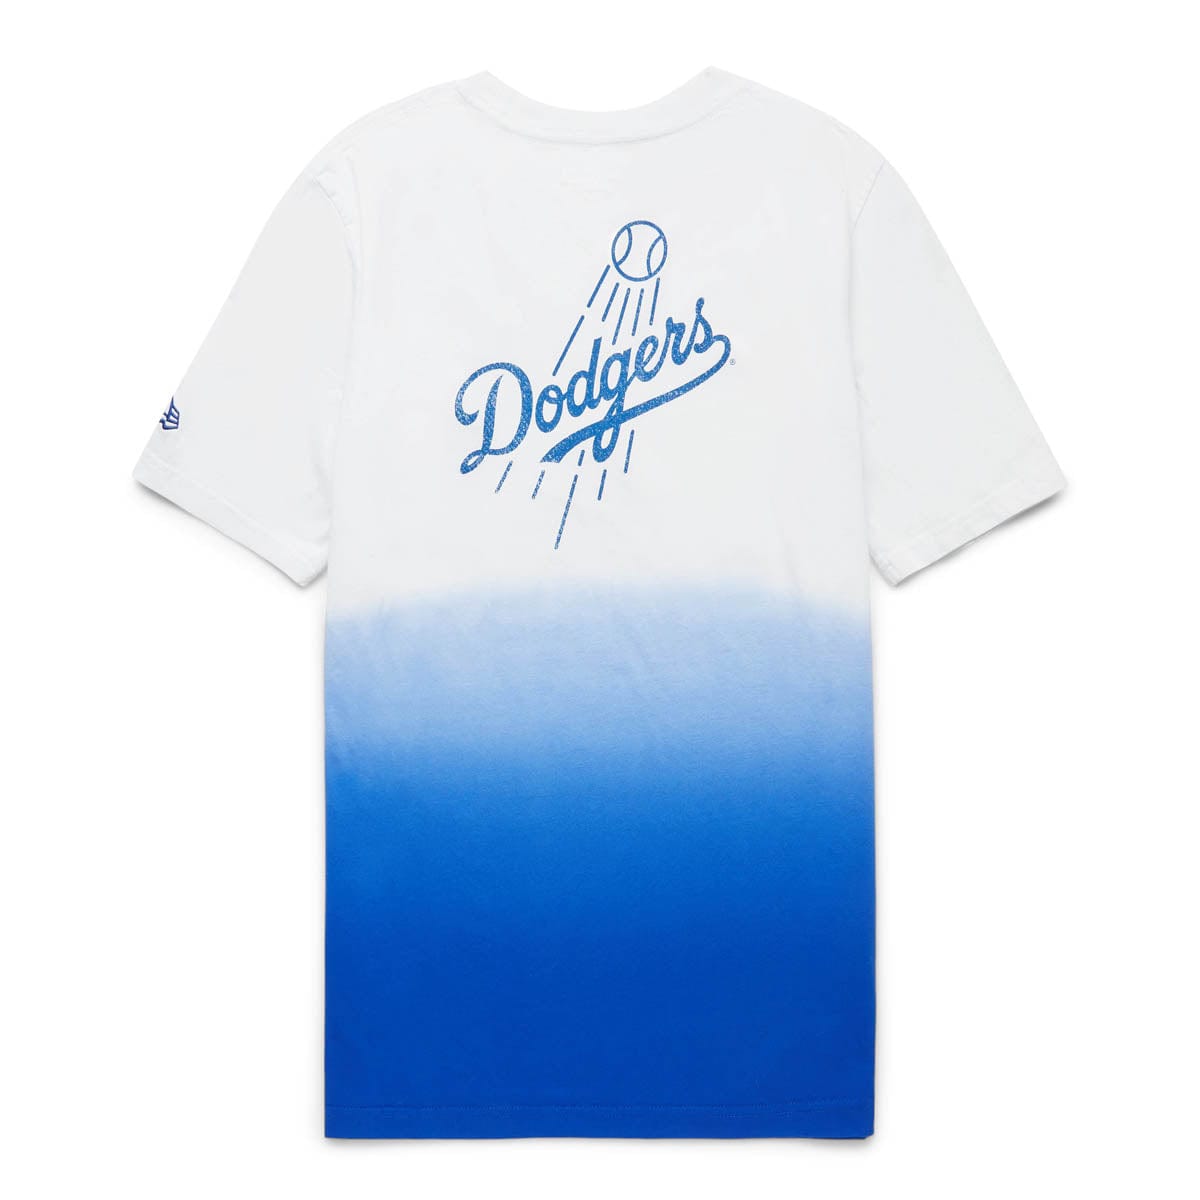 throwback dodgers shirts